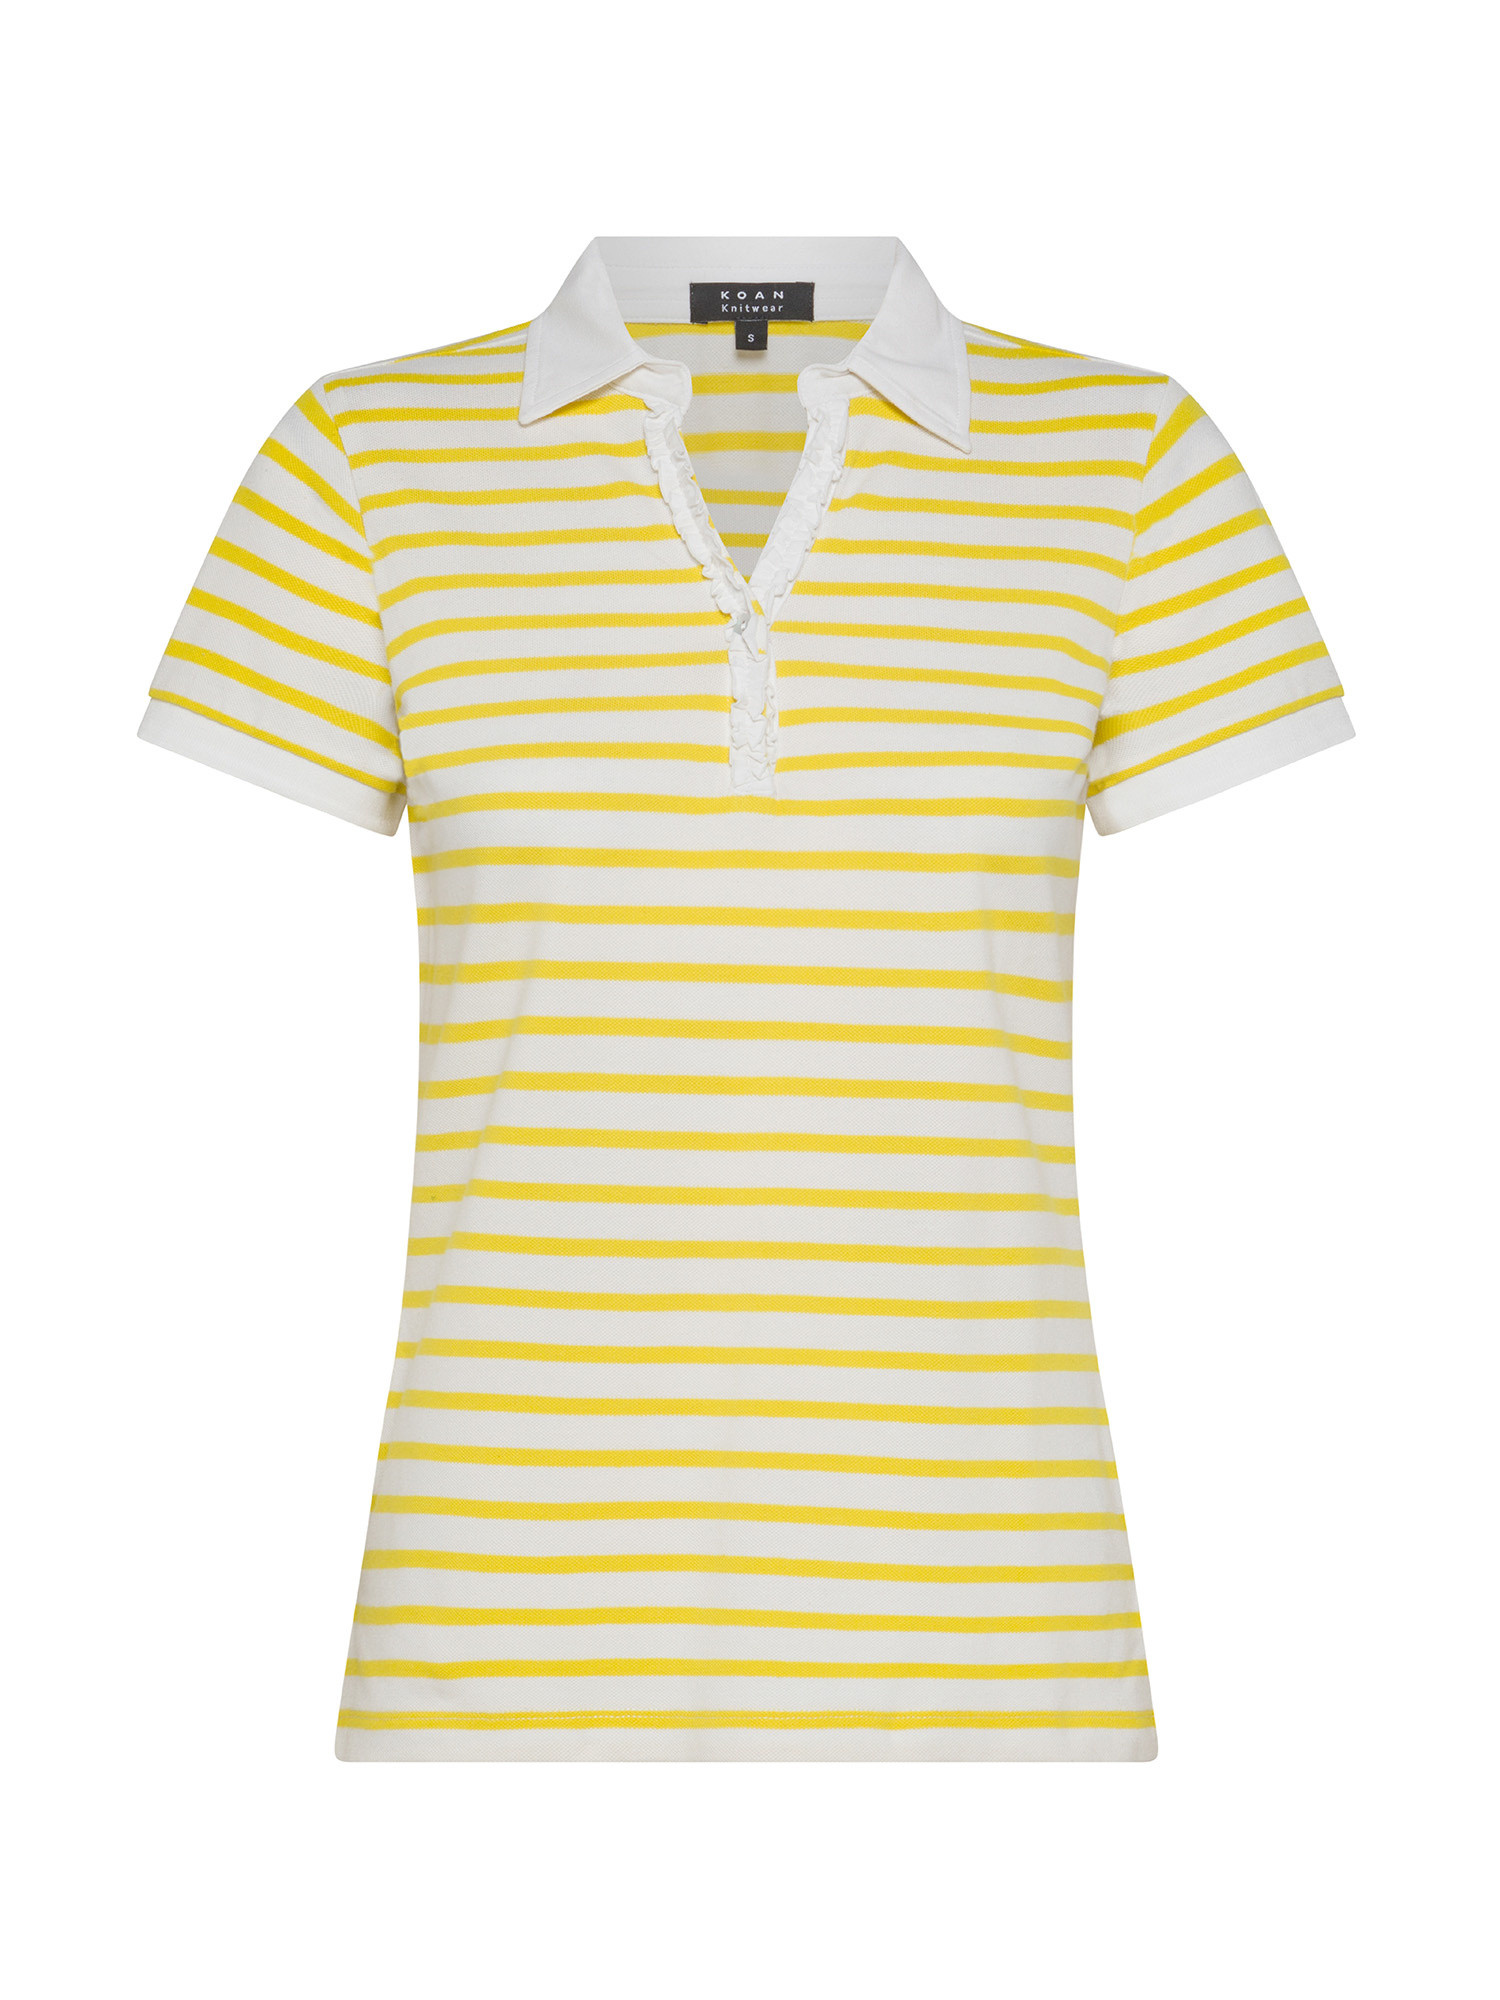 Koan - Striped T-shirt with ruffles, Yellow, large image number 0